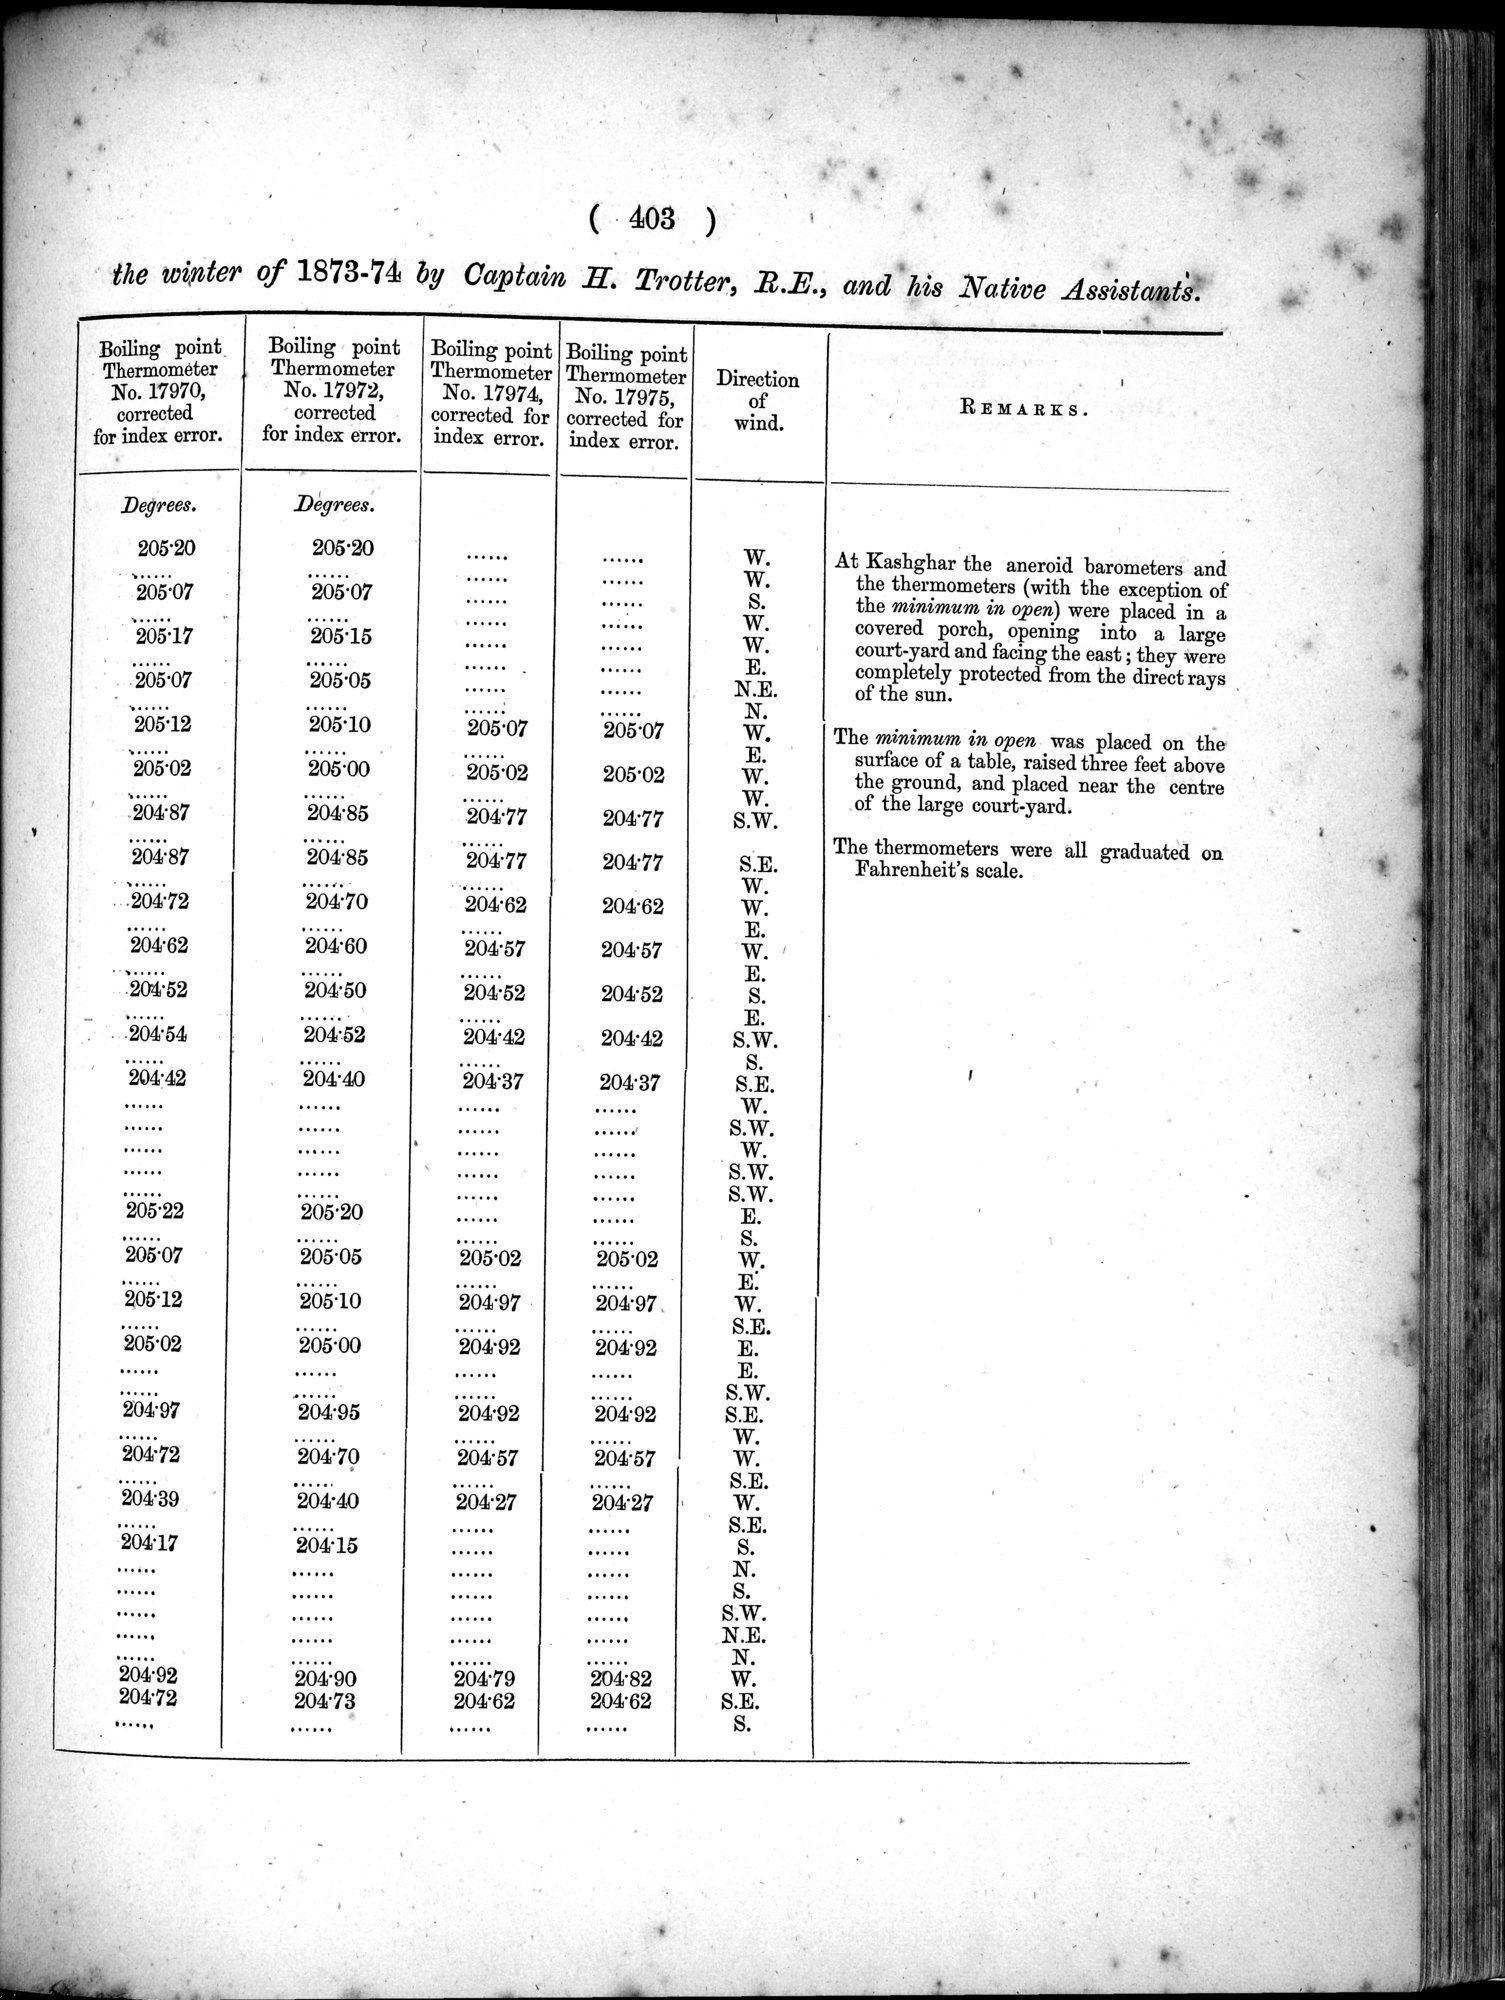 Report of a Mission to Yarkund in 1873 : vol.1 / Page 537 (Grayscale High Resolution Image)